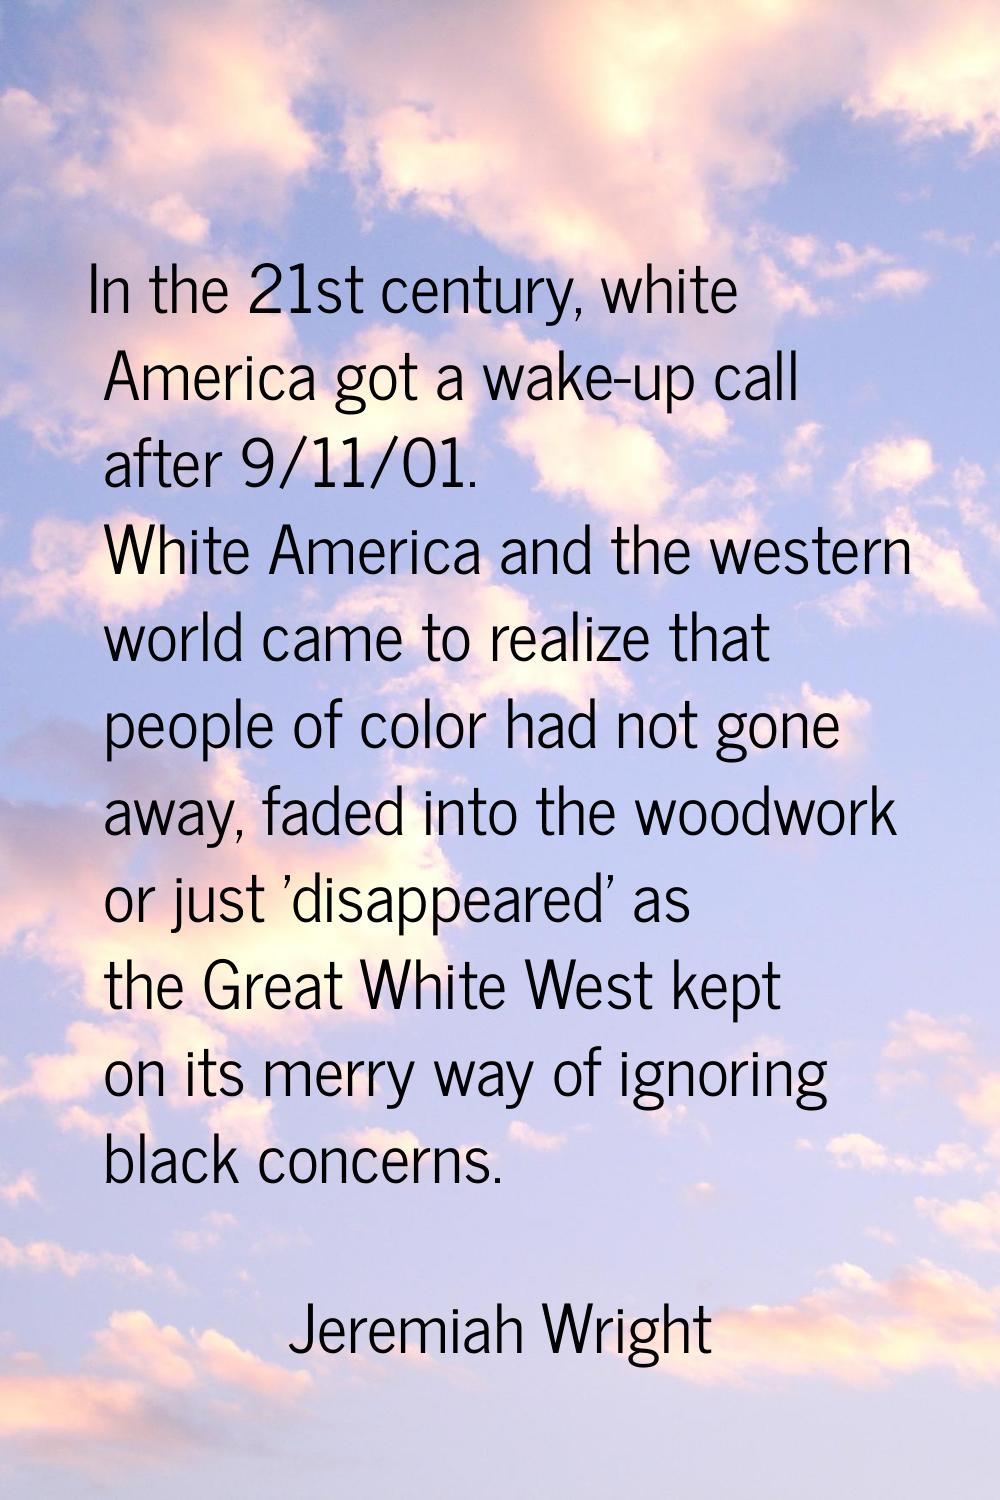 In the 21st century, white America got a wake-up call after 9/11/01. White America and the western 